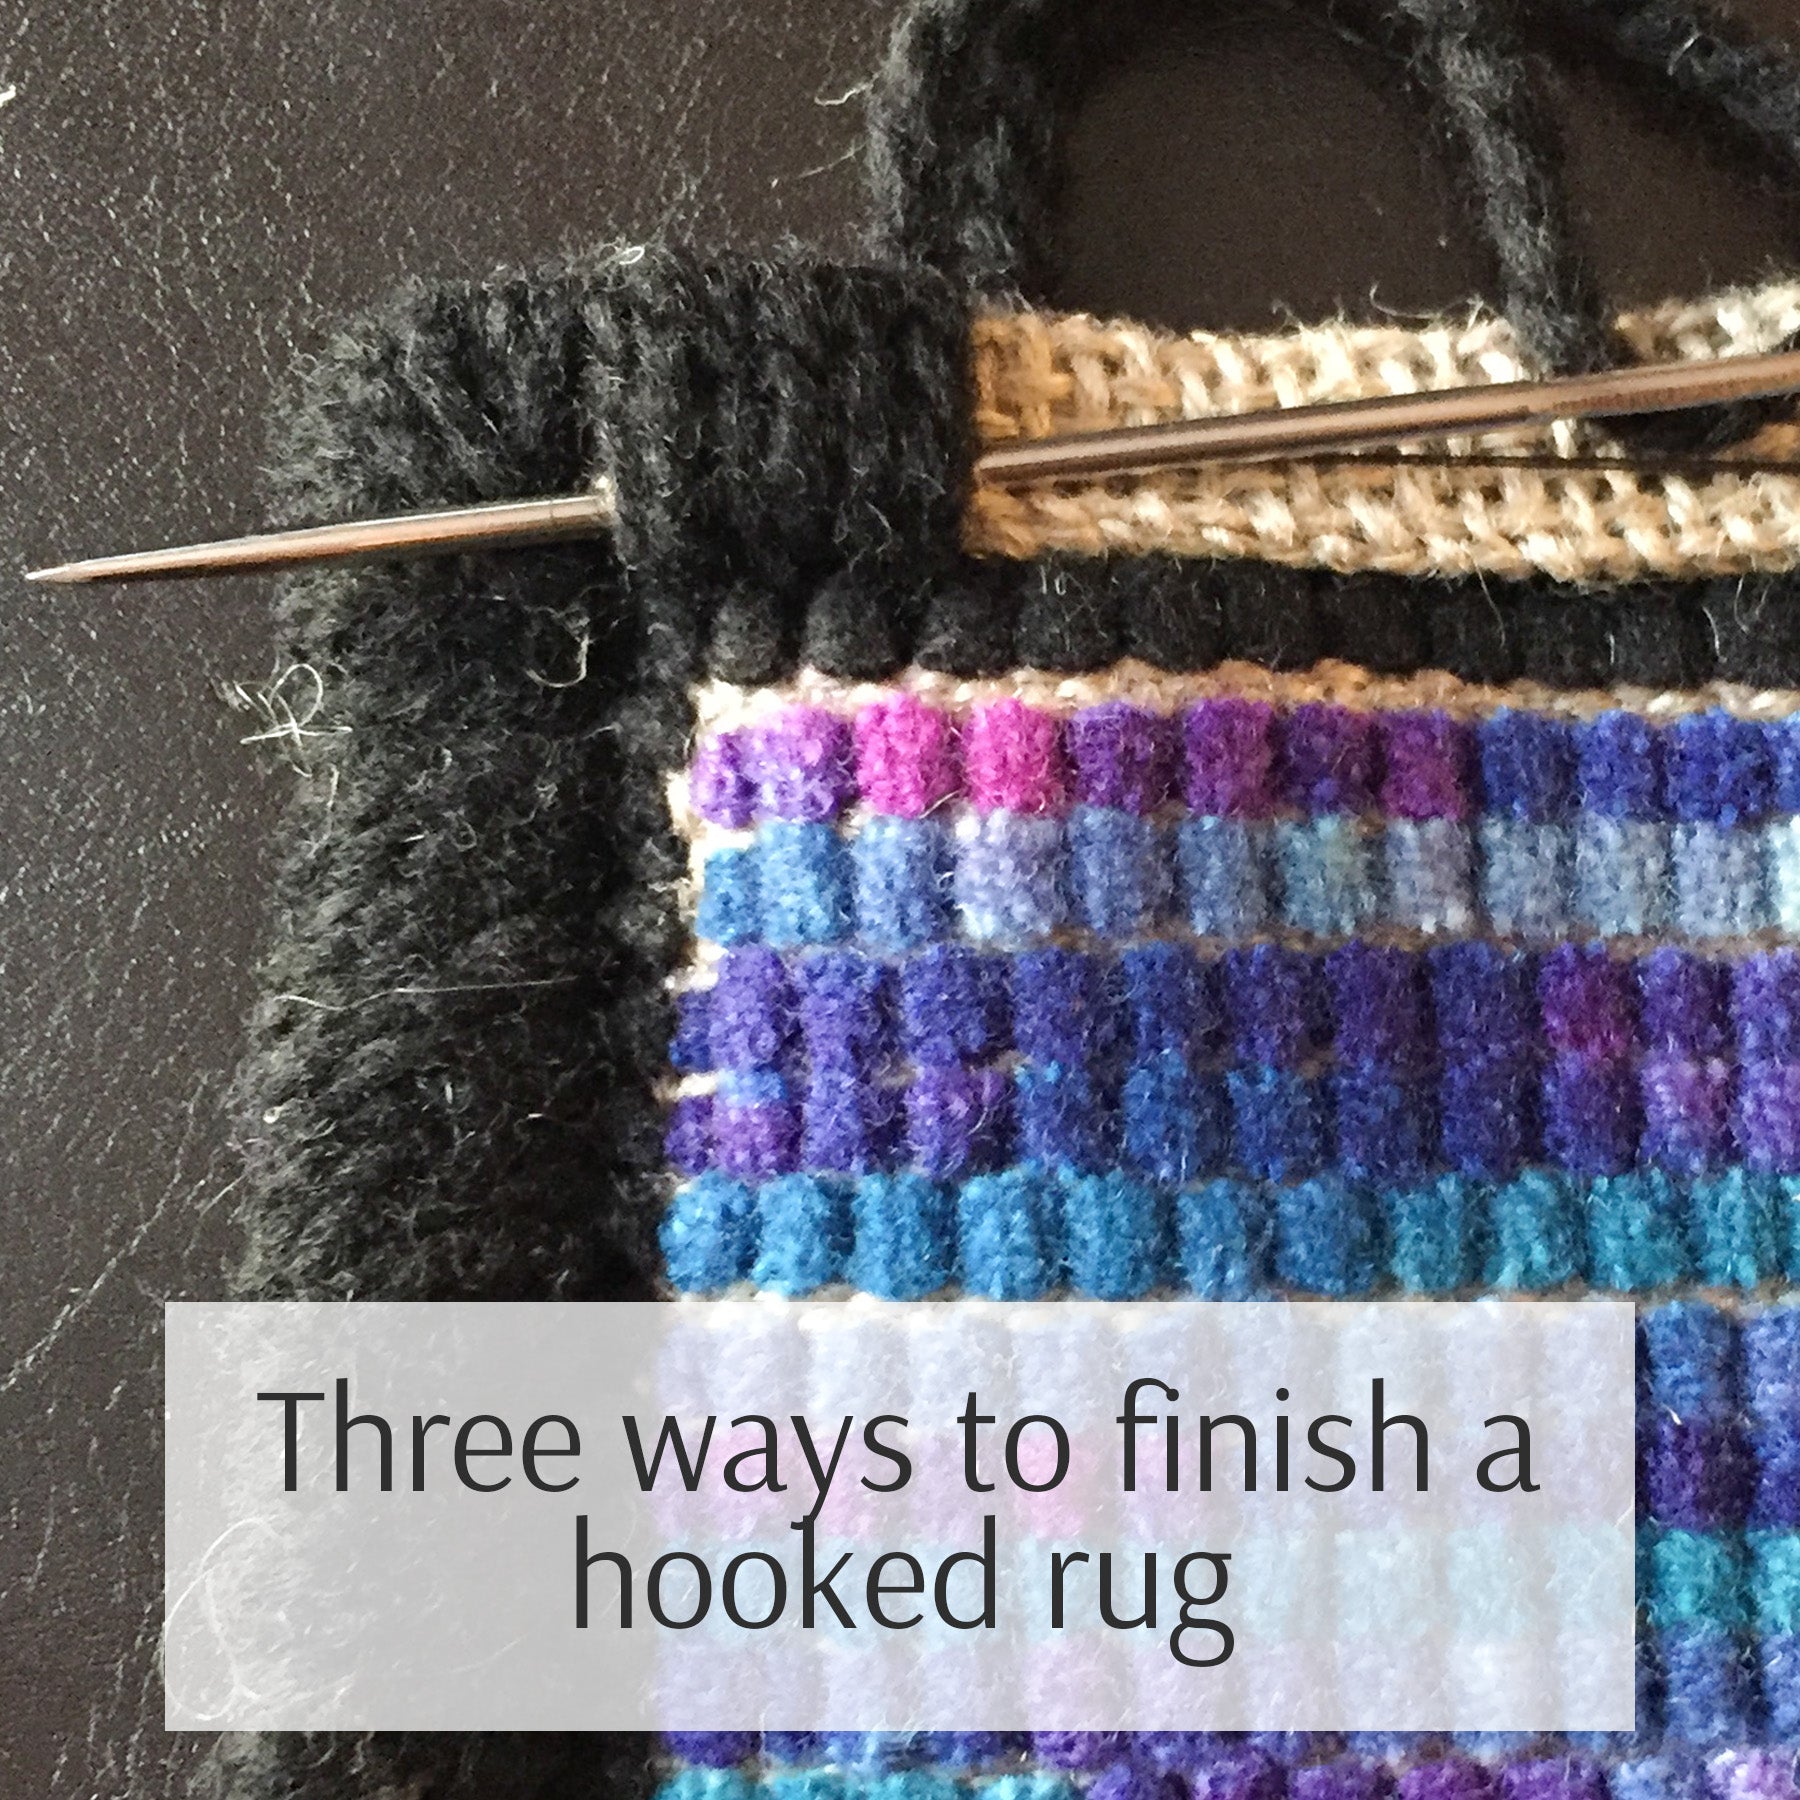 3 Options for Stitching Carpet Edges to Make a Rug